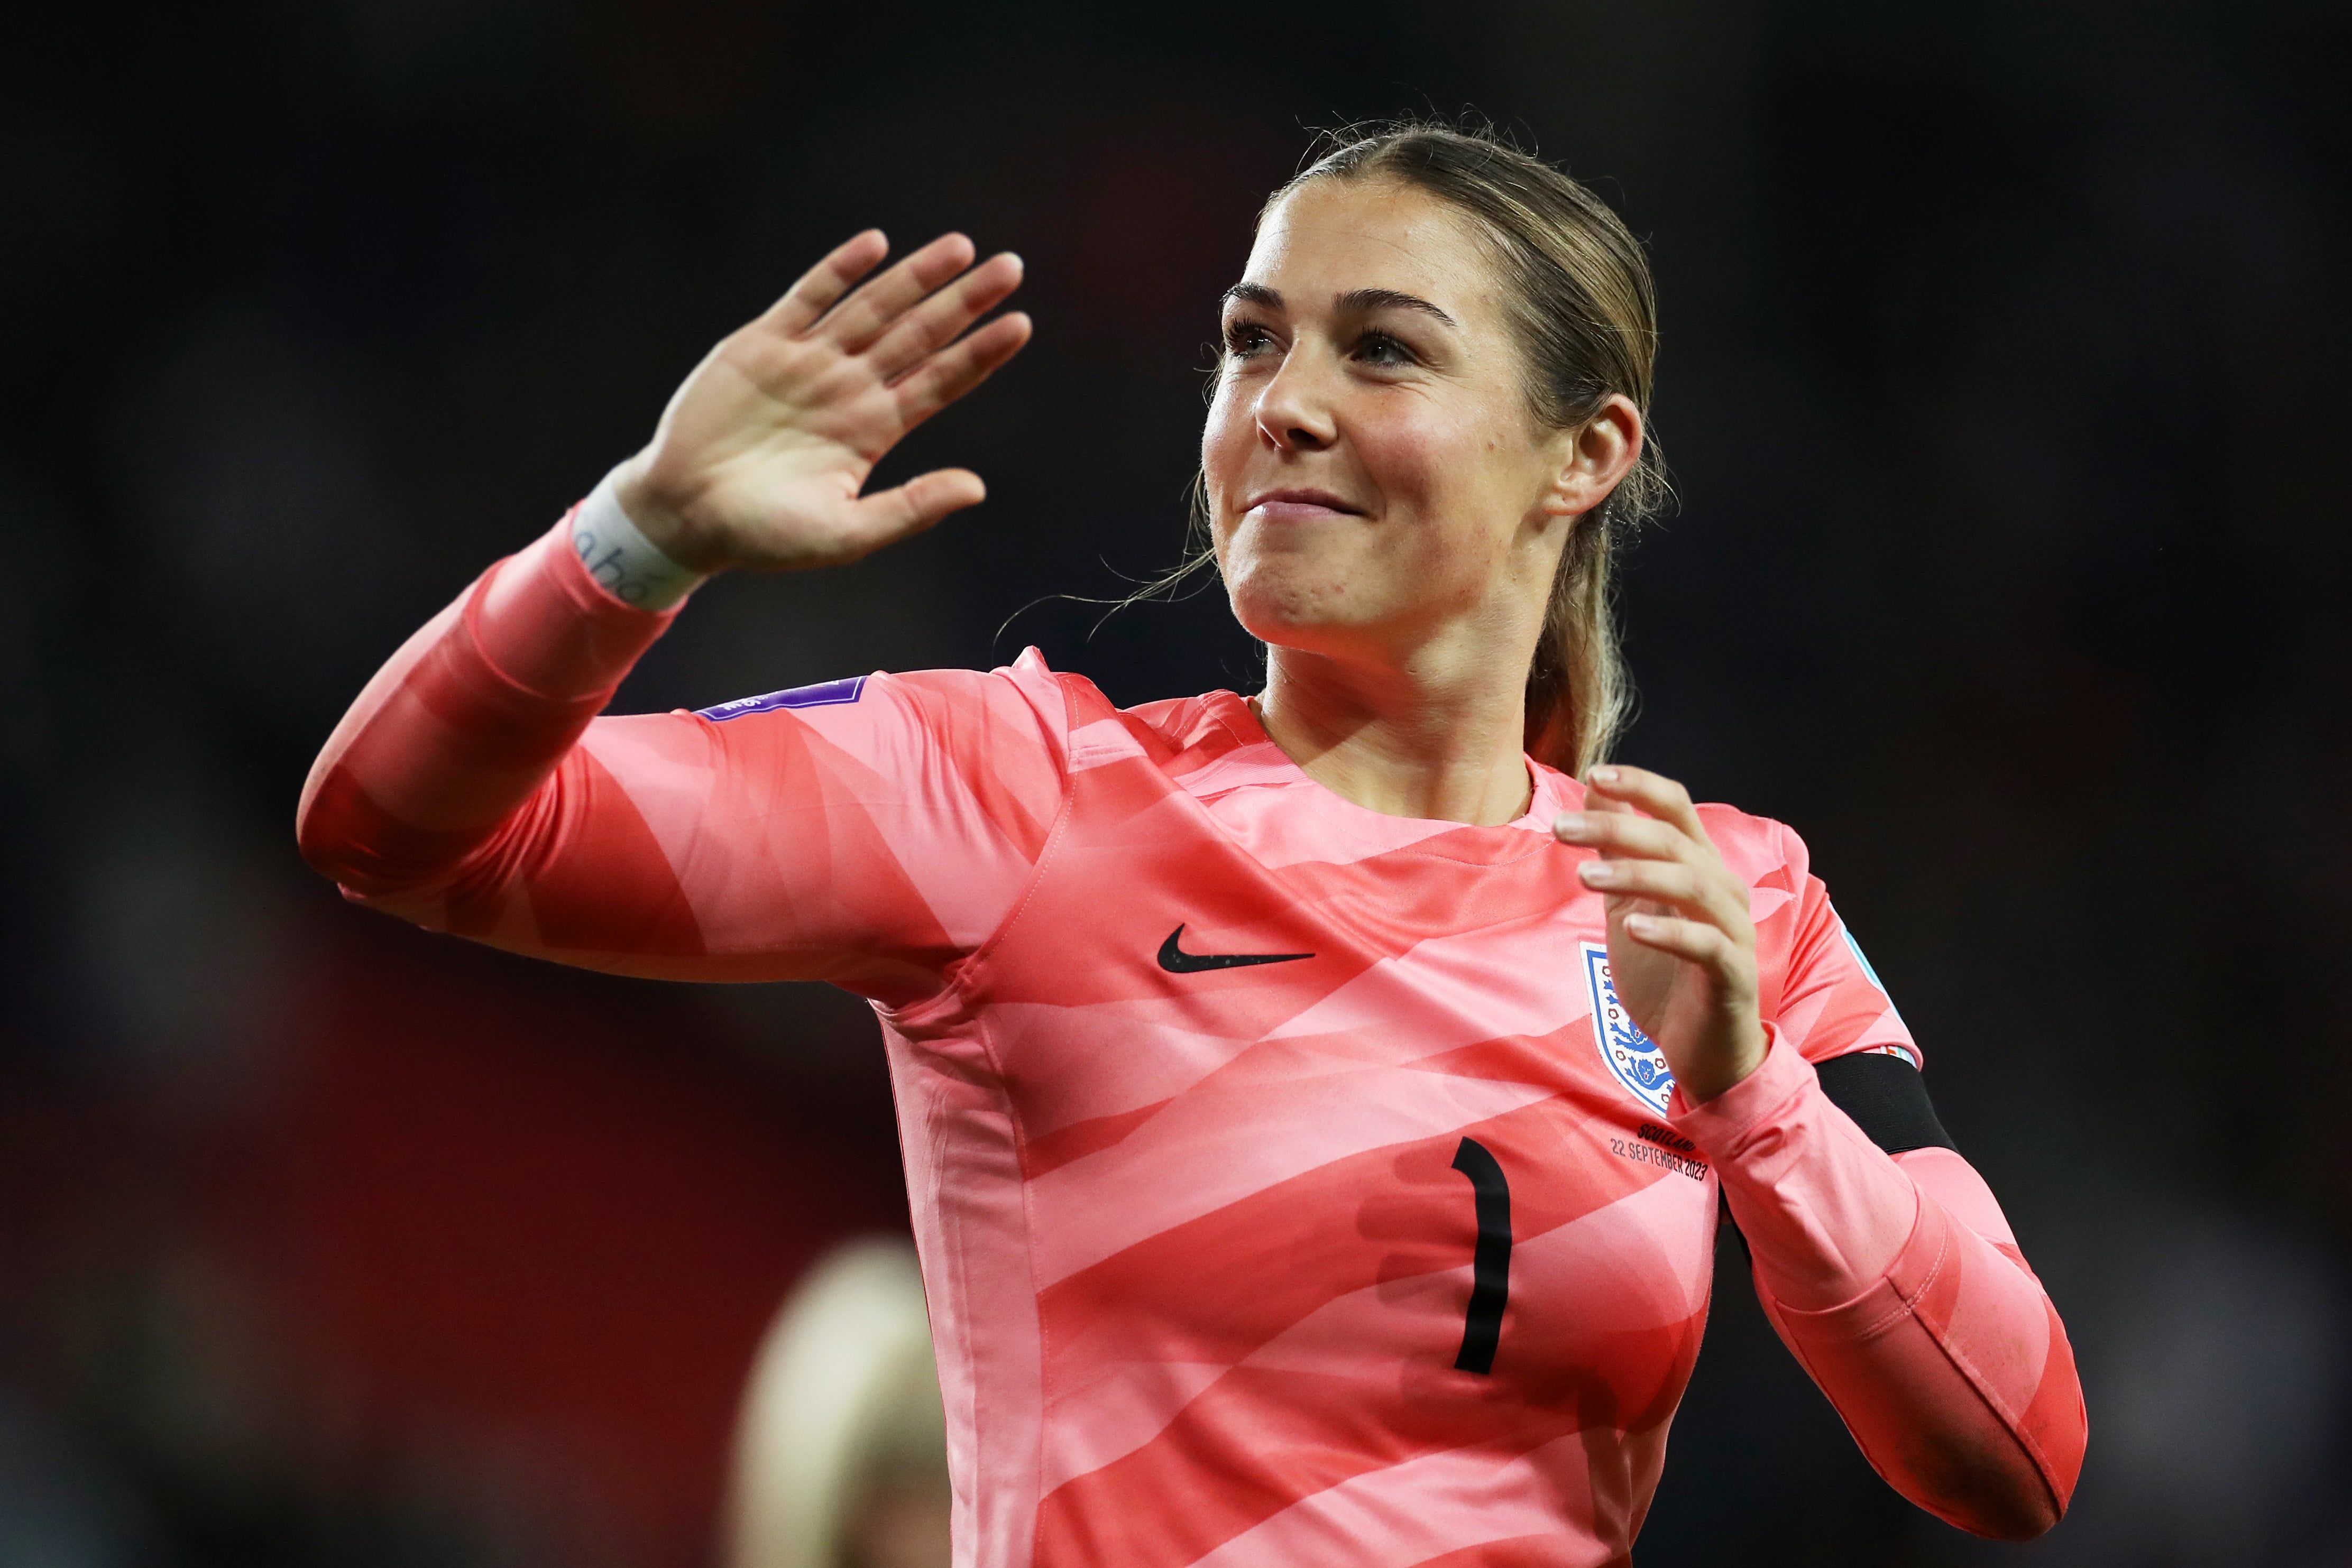 The Lionesses' Mary Earps' Goalkeeper Jerseys Sold Out Within Hours